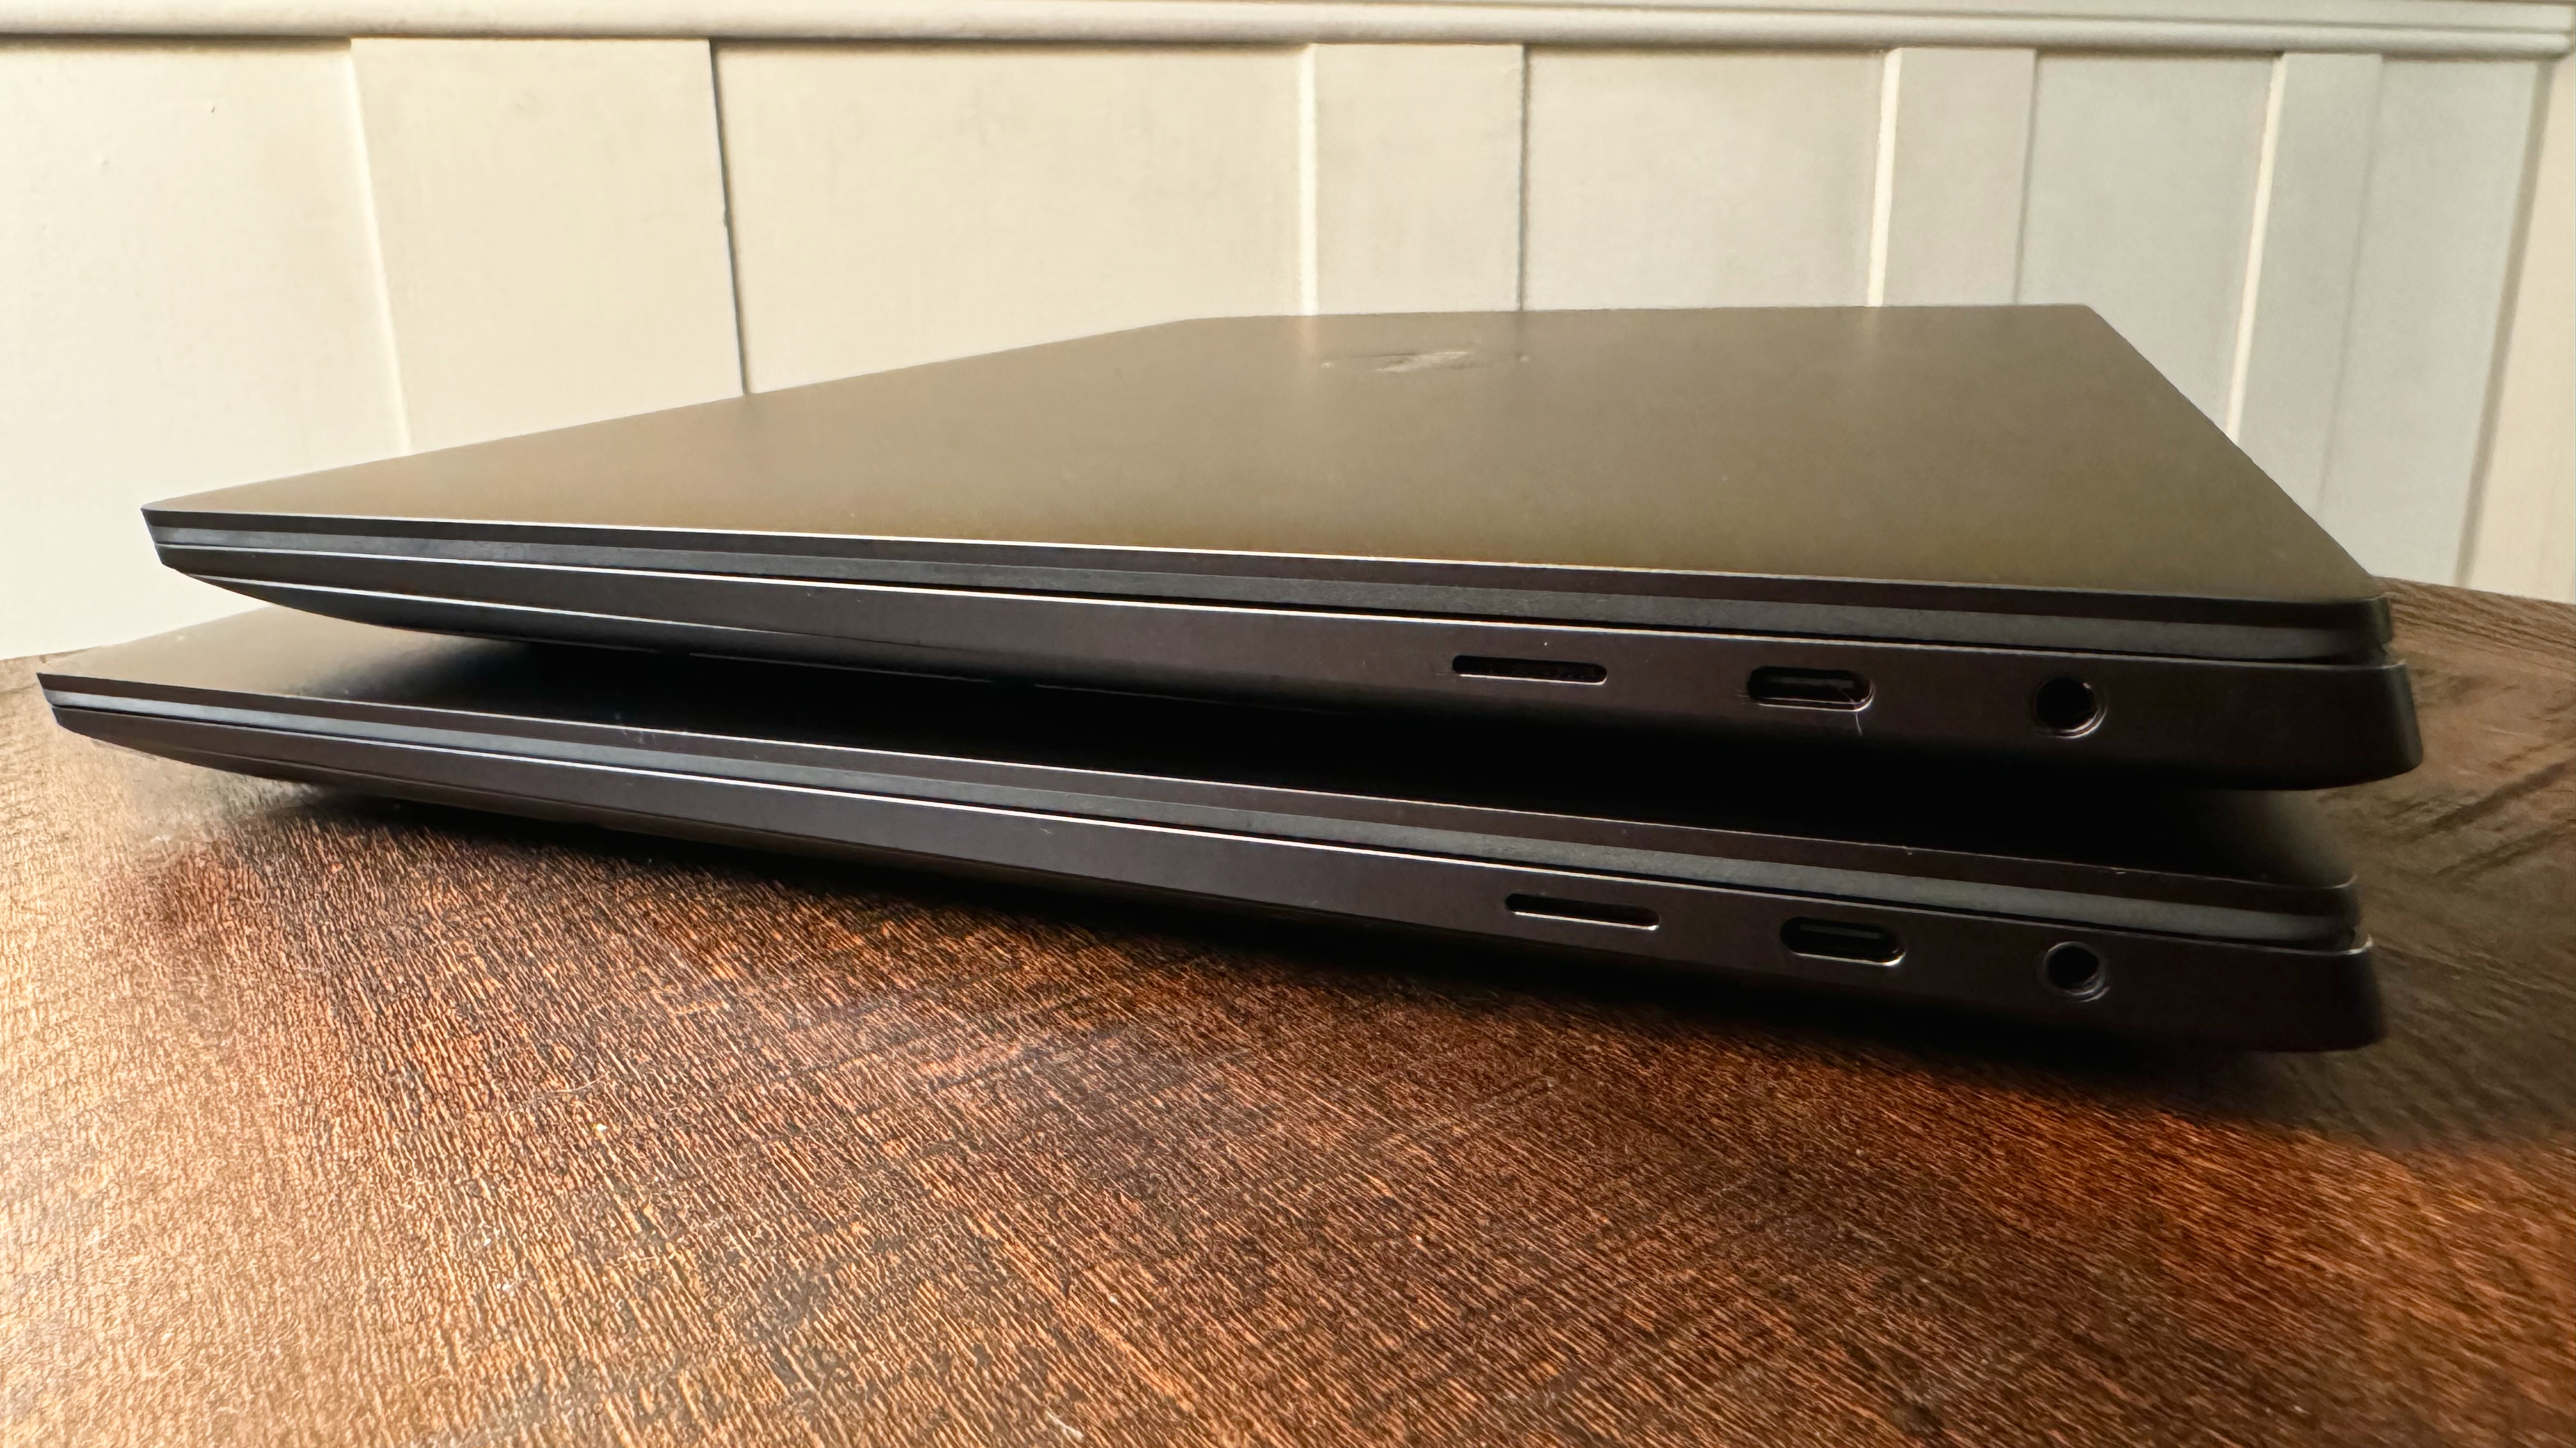 Dell XPS 16 (9640) and XPS 14 (9440)